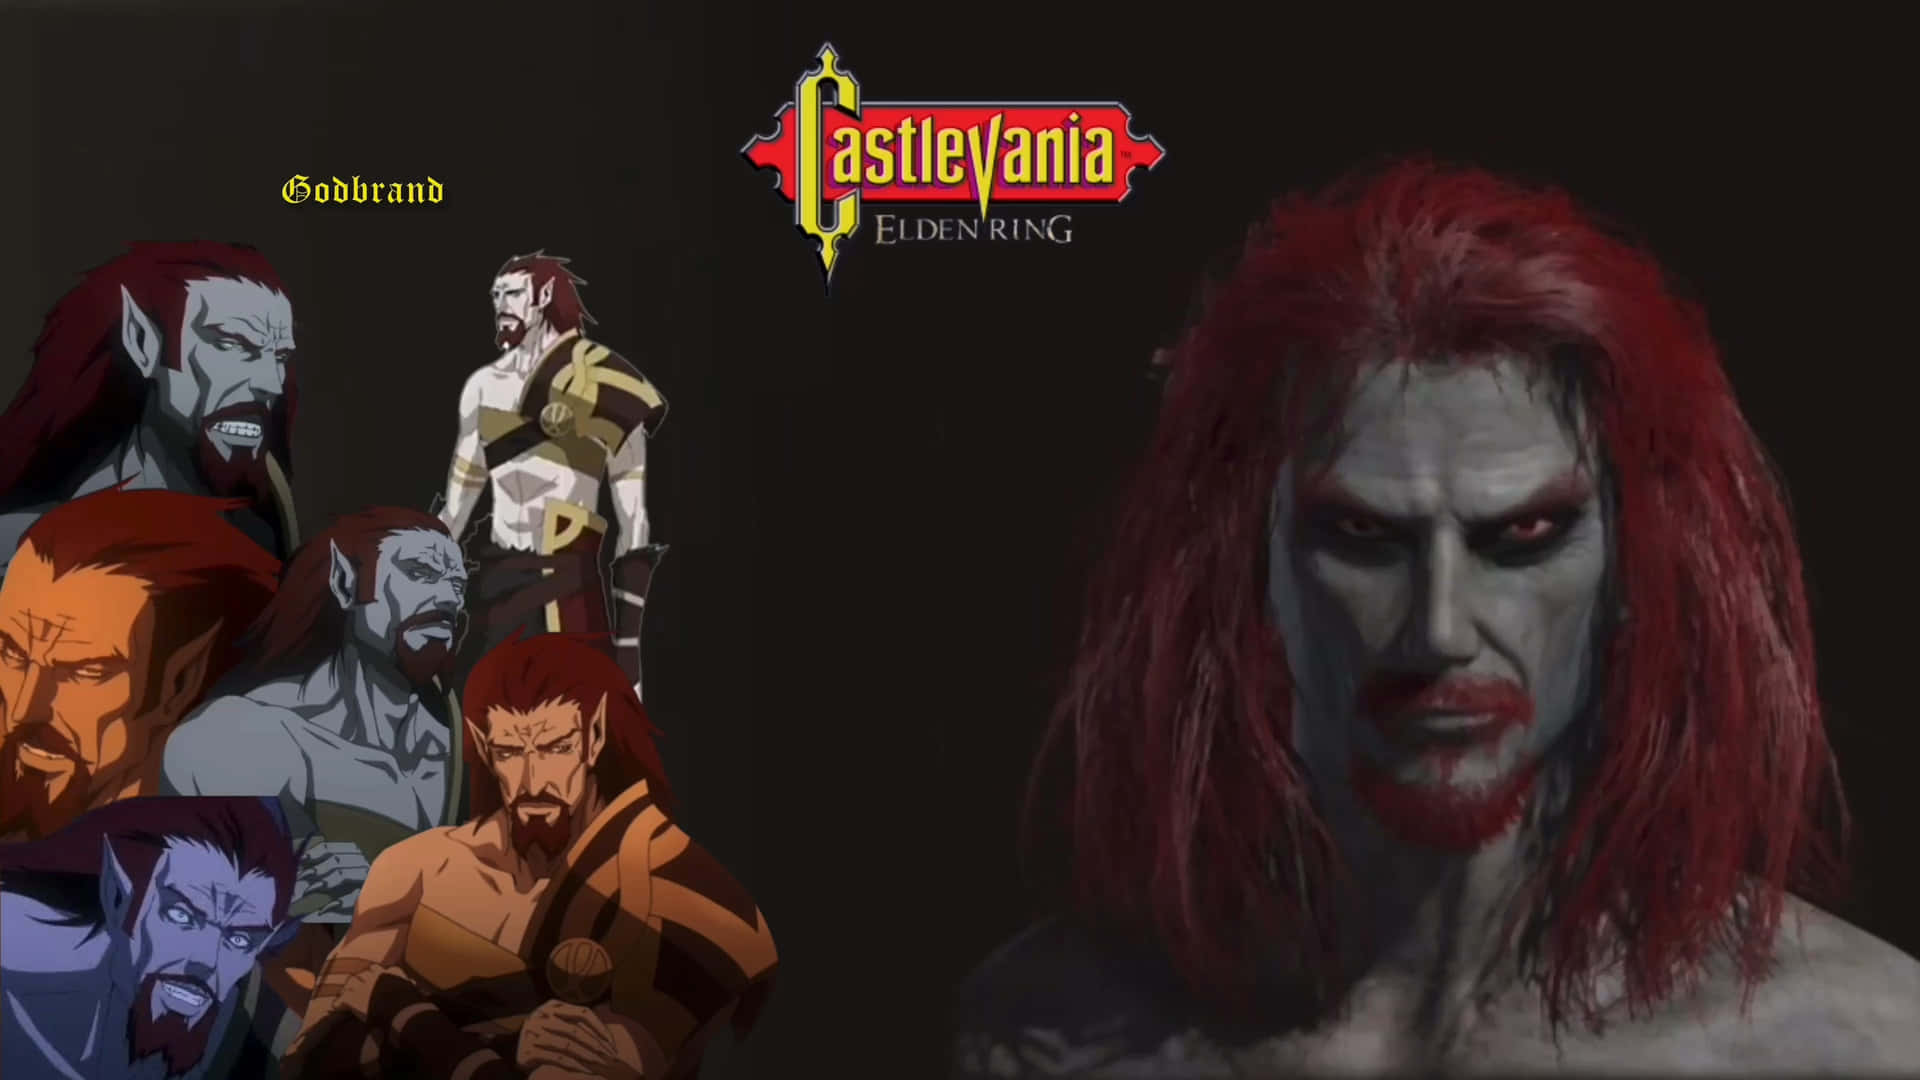 Godbrand In Action - Castlevania Animated Series Wallpaper